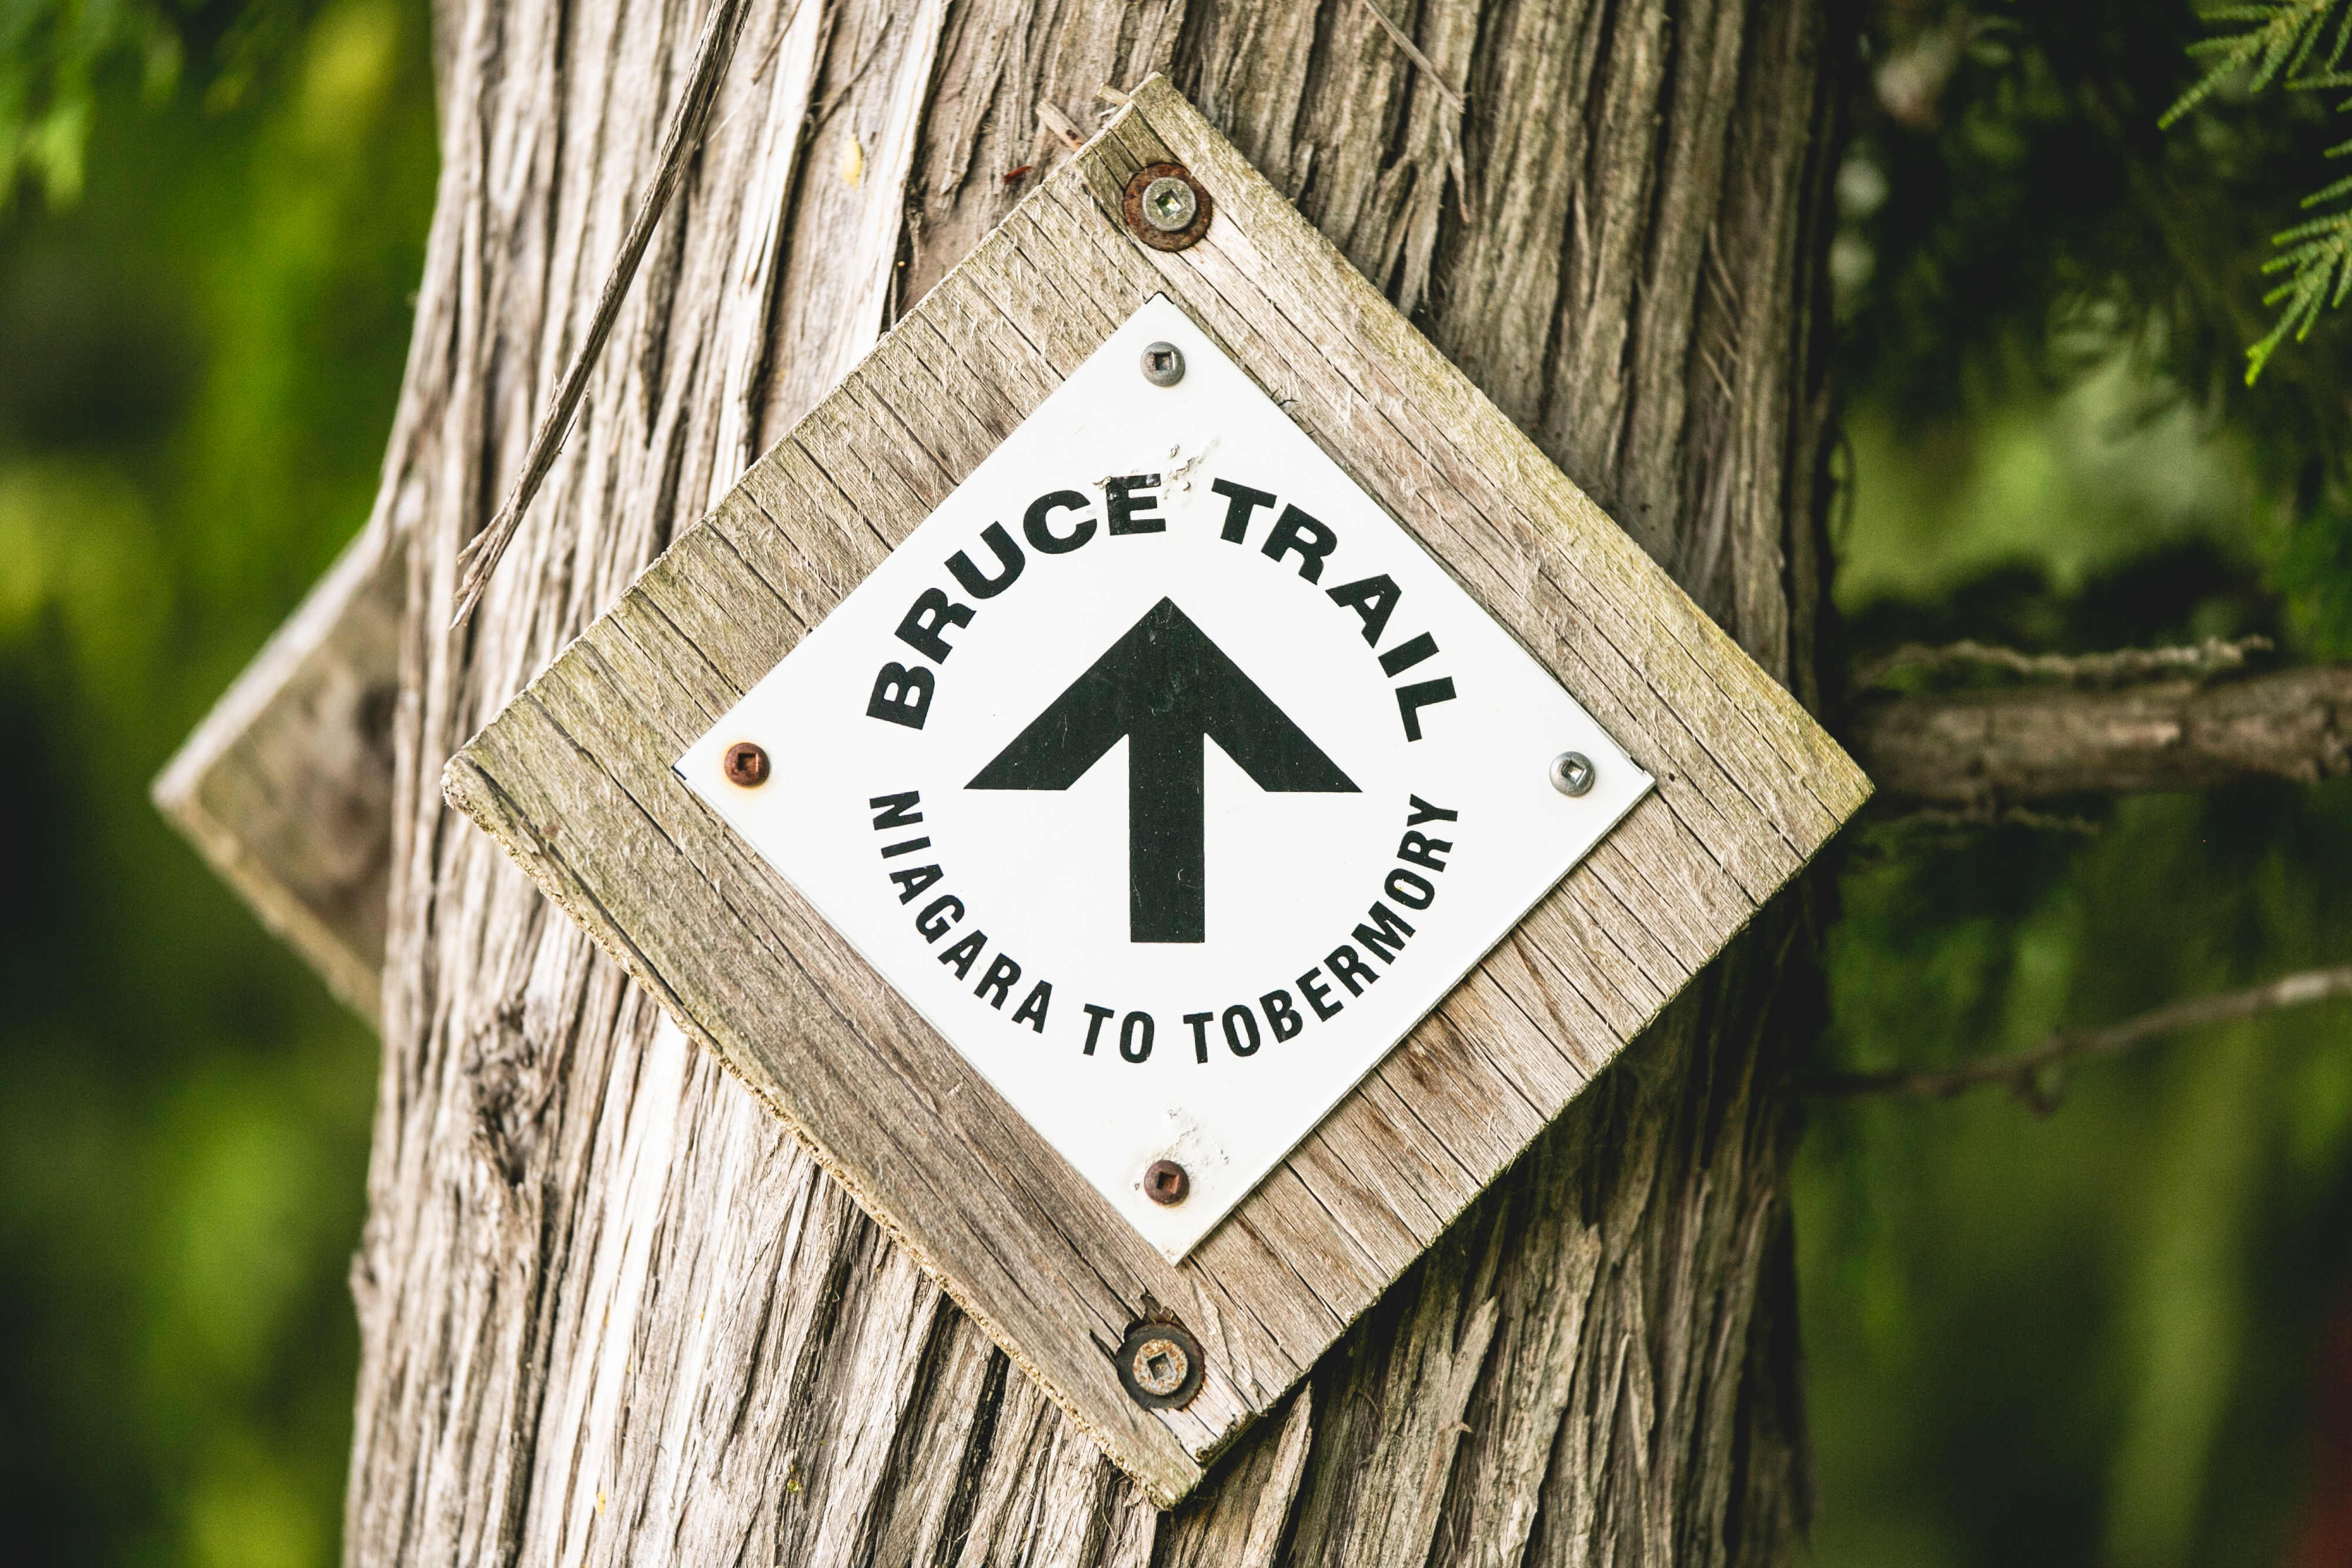 A Complete Guide to Hiking the Bruce Trail